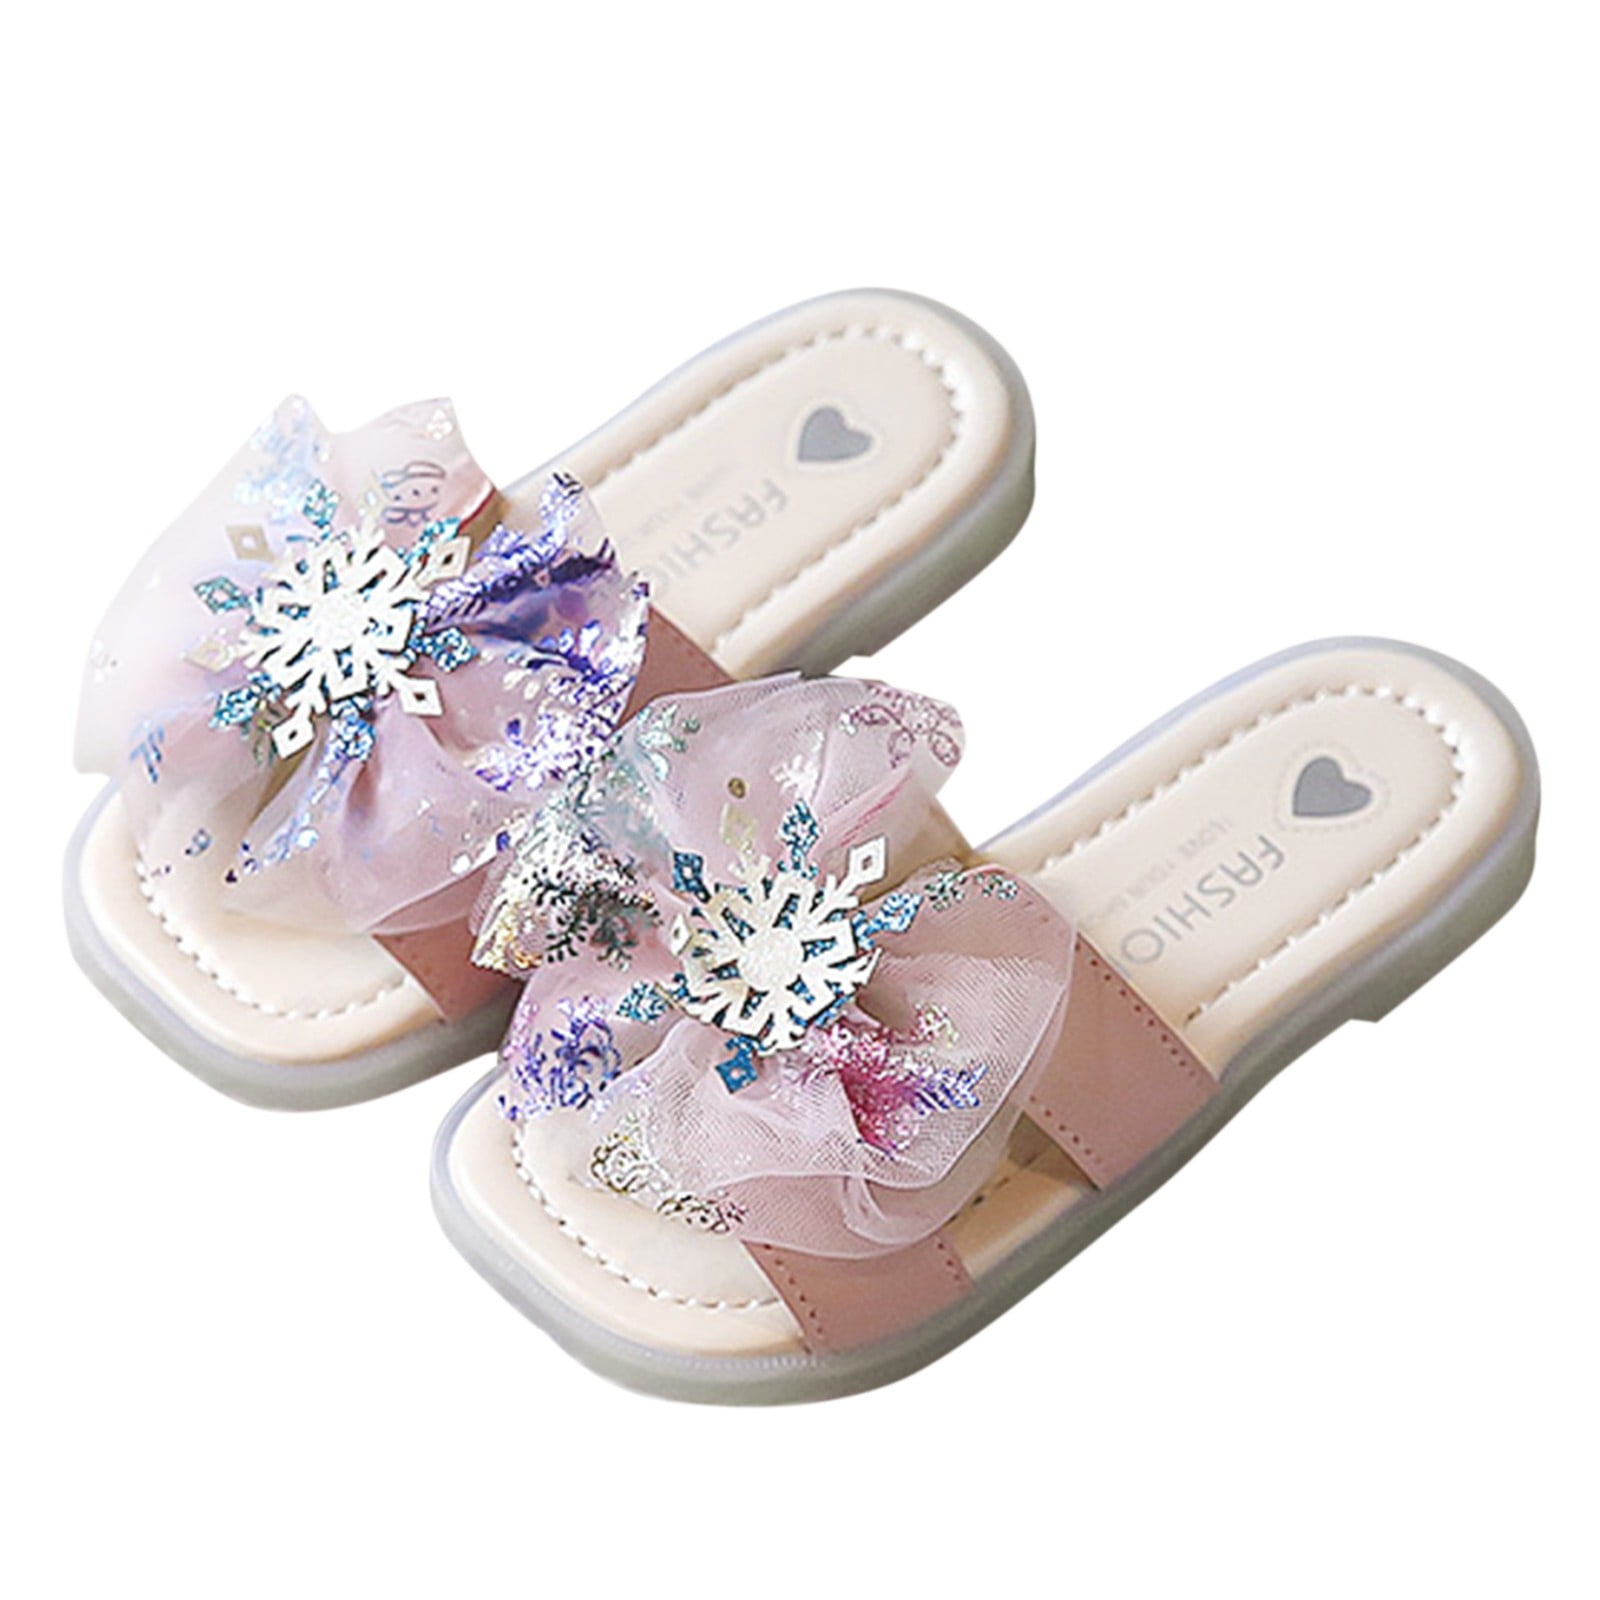 B91xZ Girls' Sandals Children Shoes With Diamond Shiny Sandals Princess  Shoes Bow High Heels Show Princess Toddler Girl Shoes Purple,Size 2